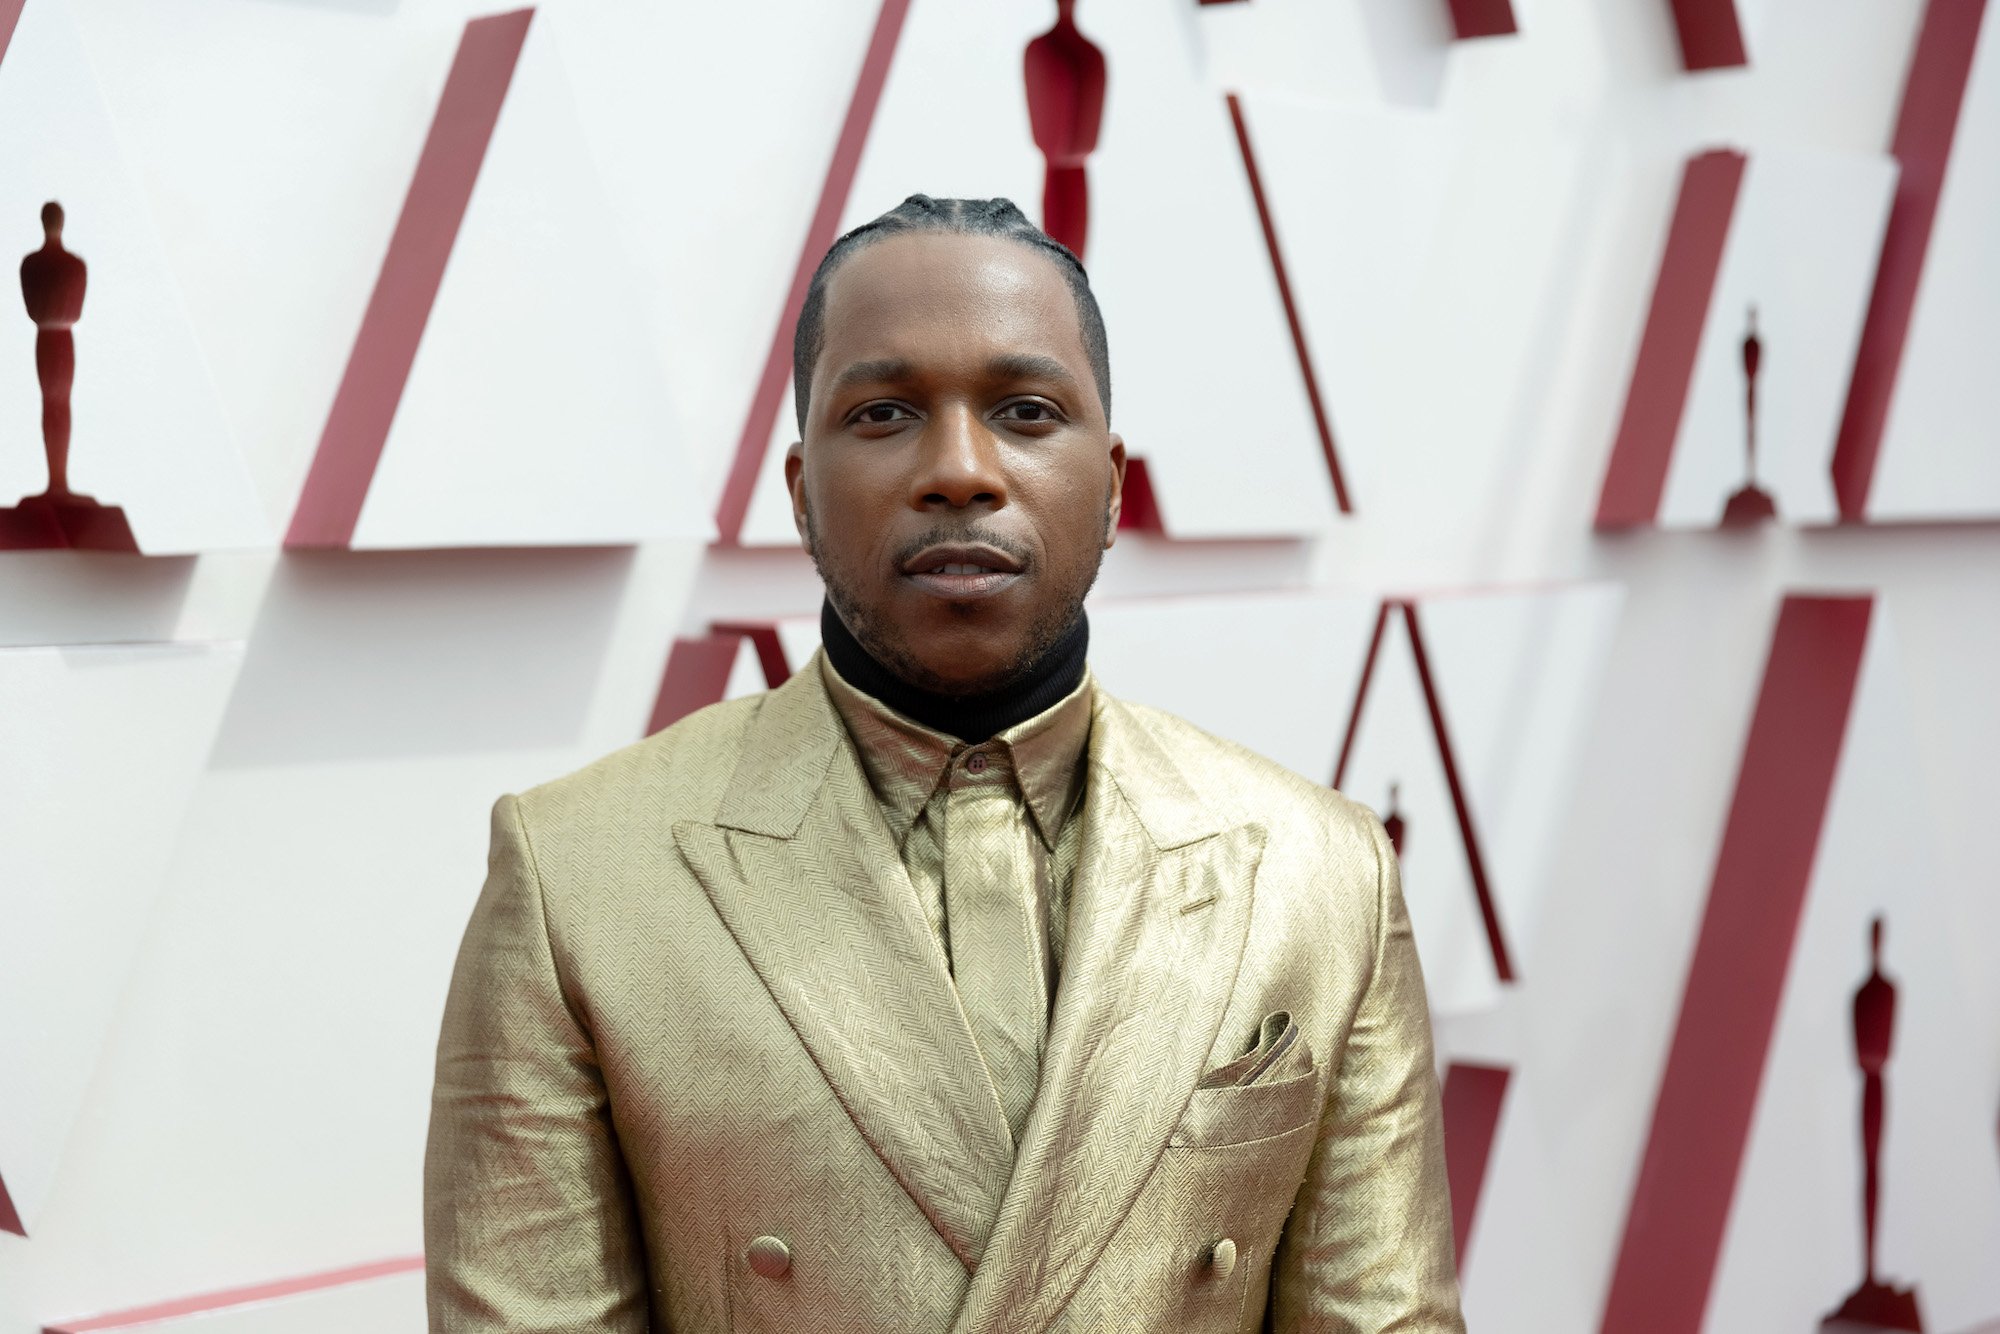 Leslie Odom Jr. attending the 93rd Annual Academy Awards in April 2021